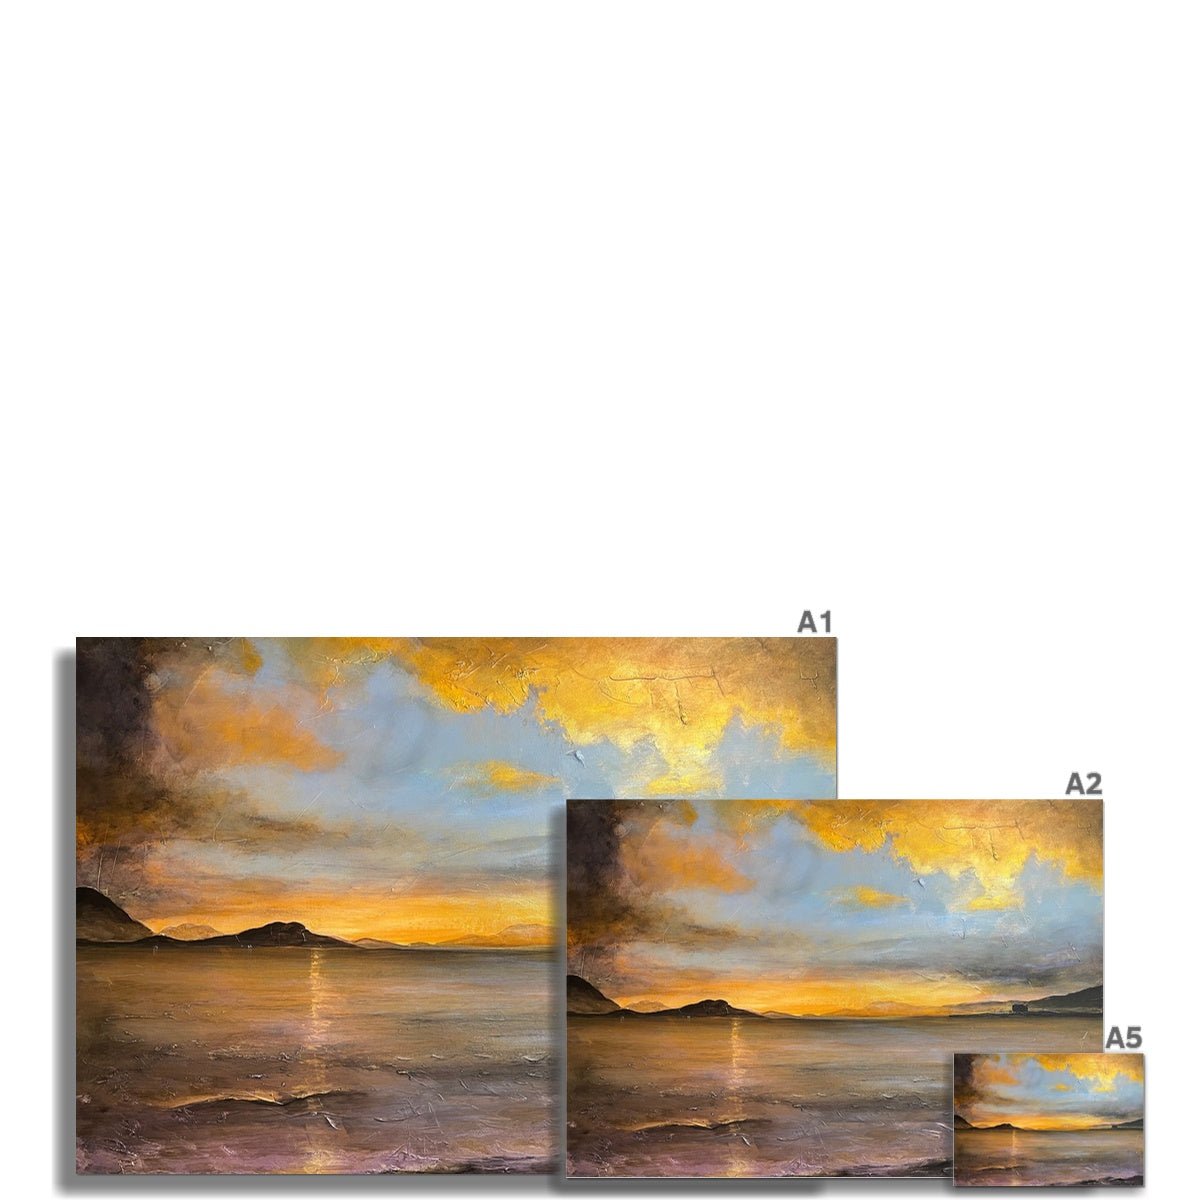 Loch Linnhe Sunset Painting | Fine Art Prints From Scotland-Unframed Prints-Scottish Lochs & Mountains Art Gallery-Paintings, Prints, Homeware, Art Gifts From Scotland By Scottish Artist Kevin Hunter